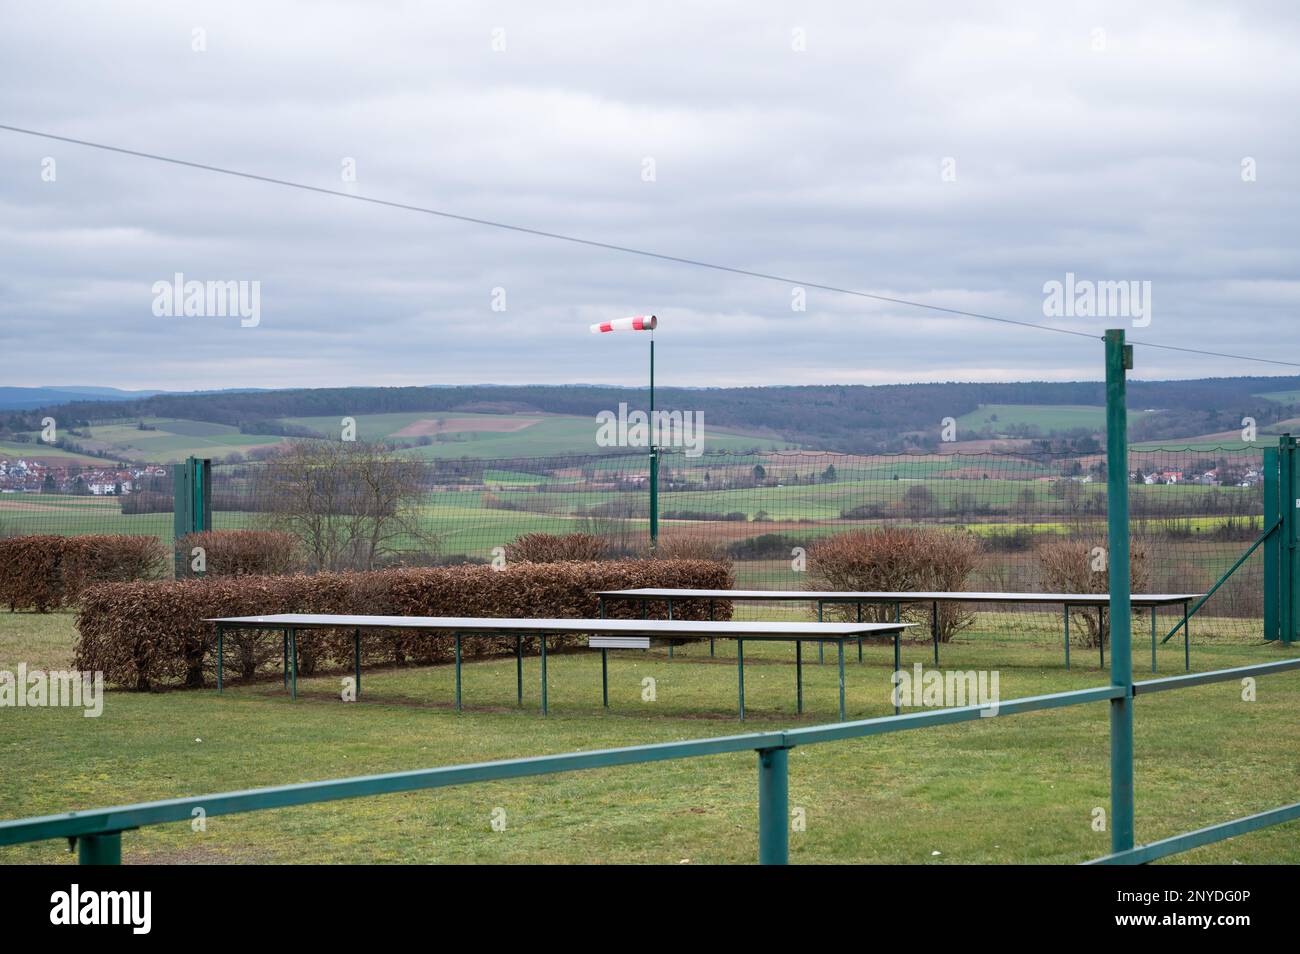 Model airfield in Schaafheim with wind shield during cloudy day, strong crosswind, countryside, Germany Stock Photo